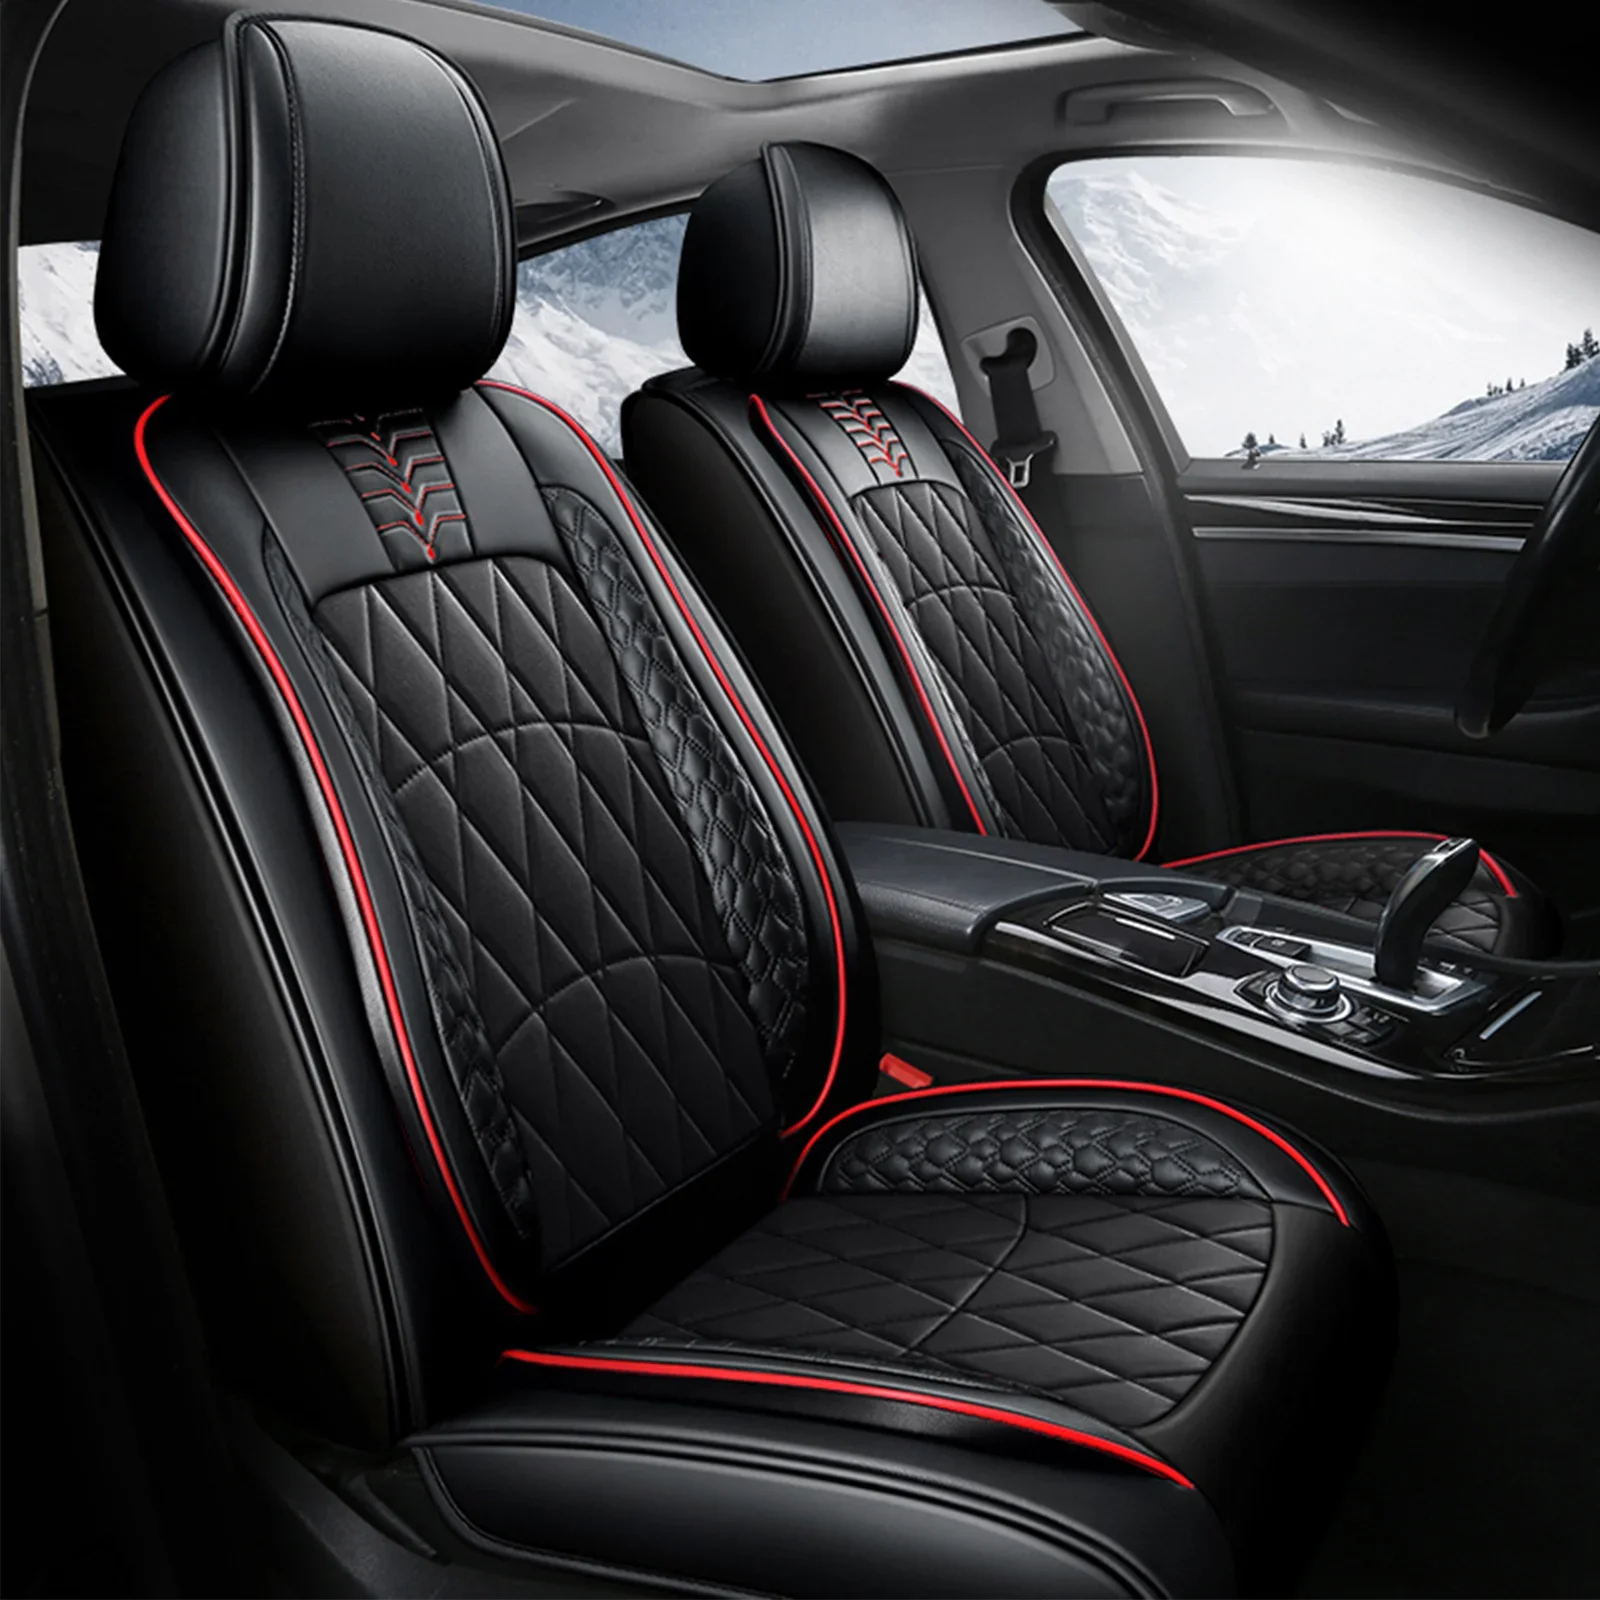 

Breathable Waterproof Adjustable PU Leatherette 5 Seat Car Seat Cover, Full Surrounded Rear Bench Pad Protector Cushion